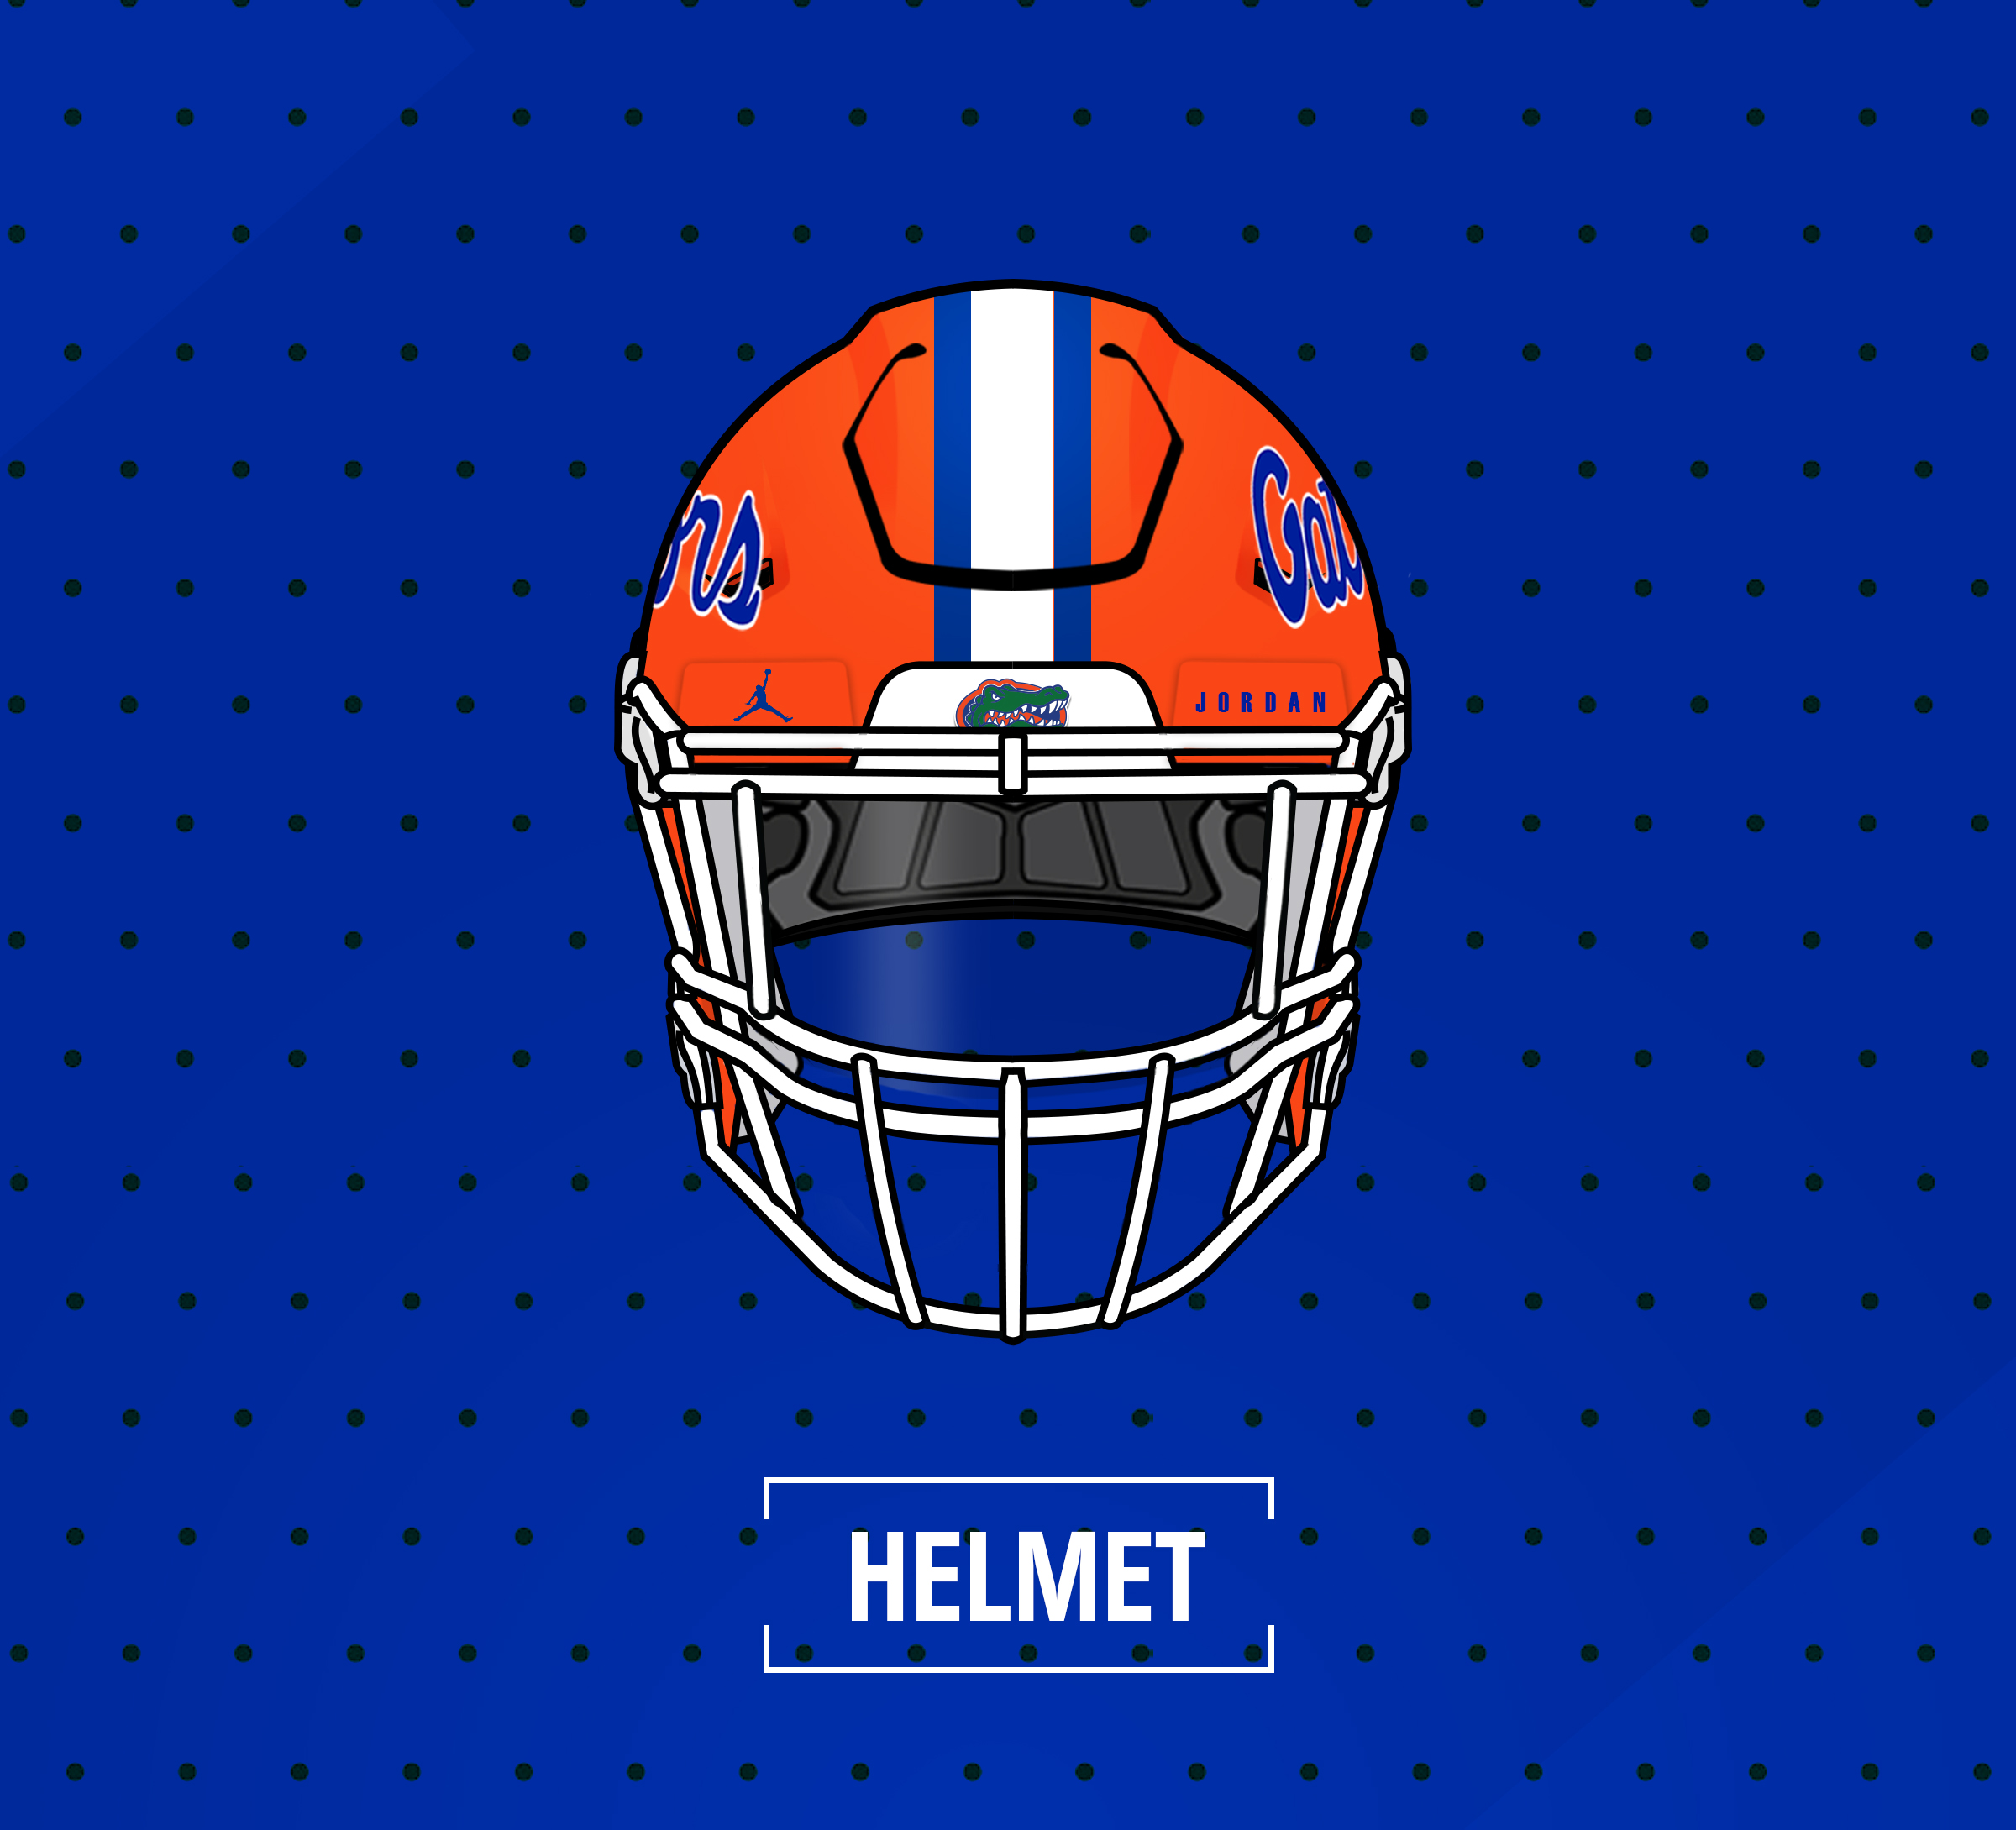 Florida Gators Concept Uniforms. A collection of potential new